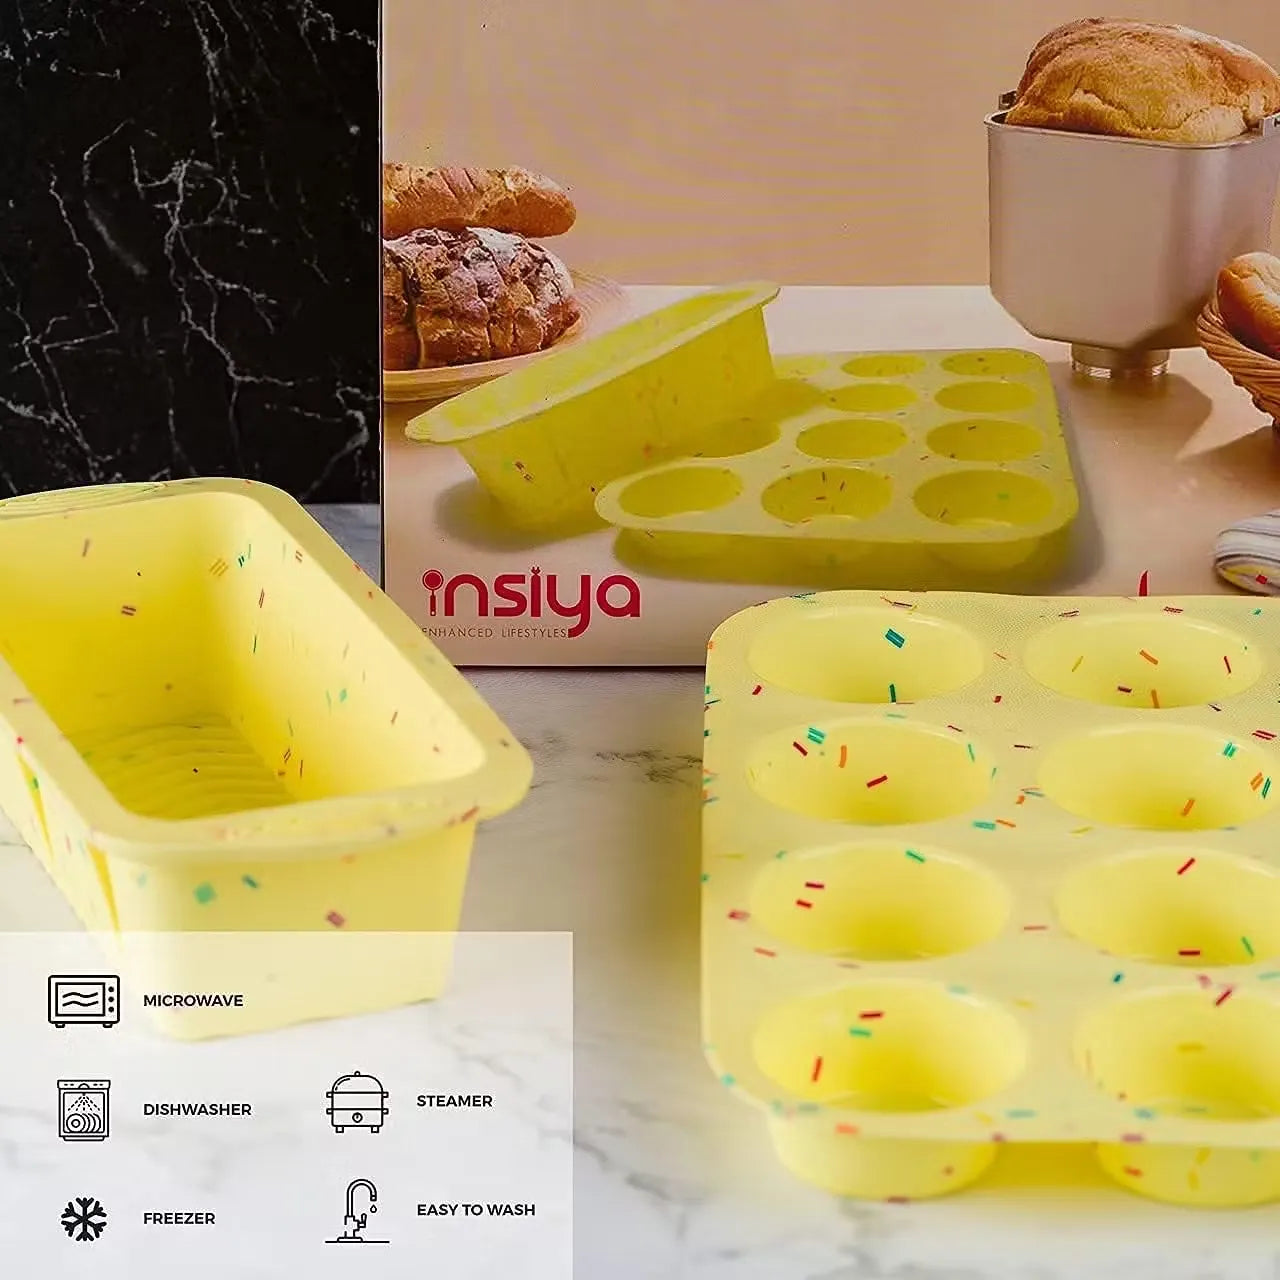 Insiya 2-in-1 baking pan made from material with number muffin cups and a rectangular baking area. Bake sweet and savory treats with ease using the Insiya 2-in-1 pan! Muffin cups and baking tray combined for space-saving convenience